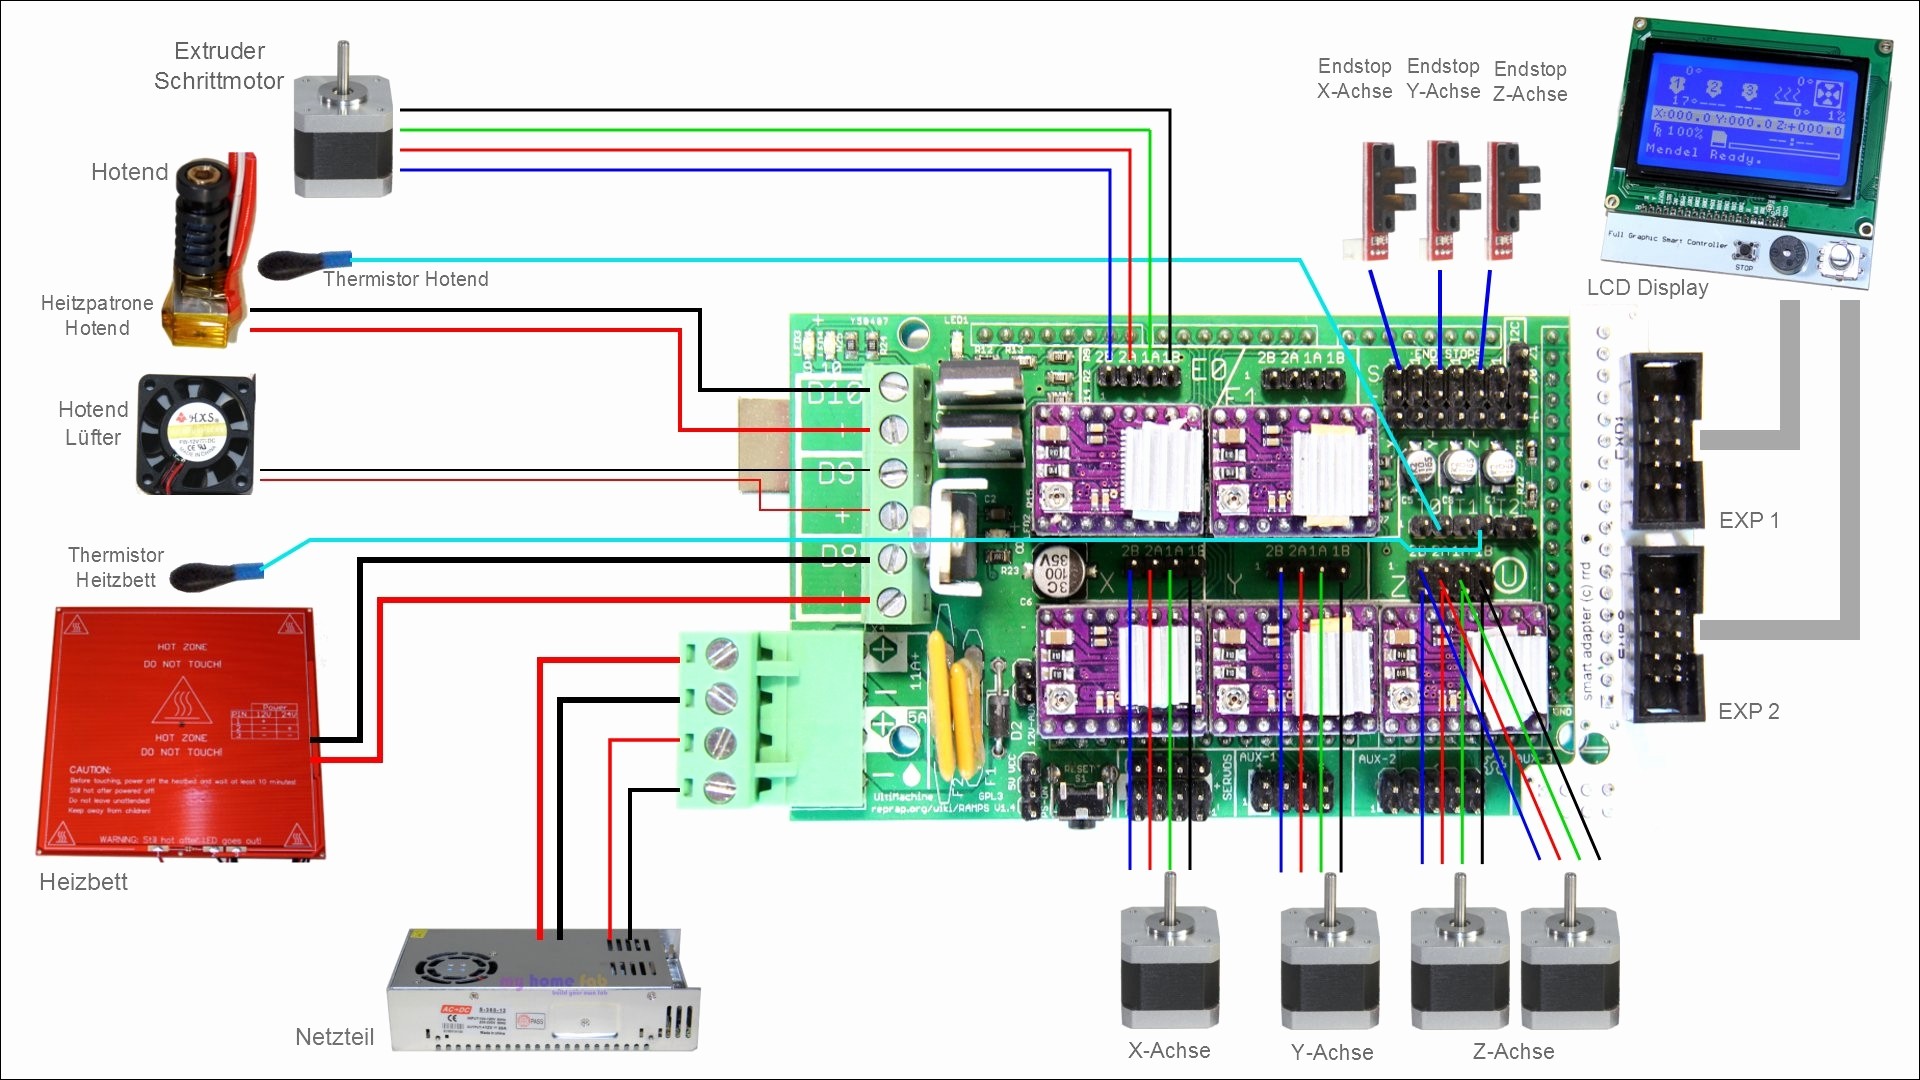 ramps 1 4 wiring diagram new ramps v1 4 from 12v to 24v electrical rh crissnetonline Ramps 1 4 Shield Ramps 1 4 Electronics